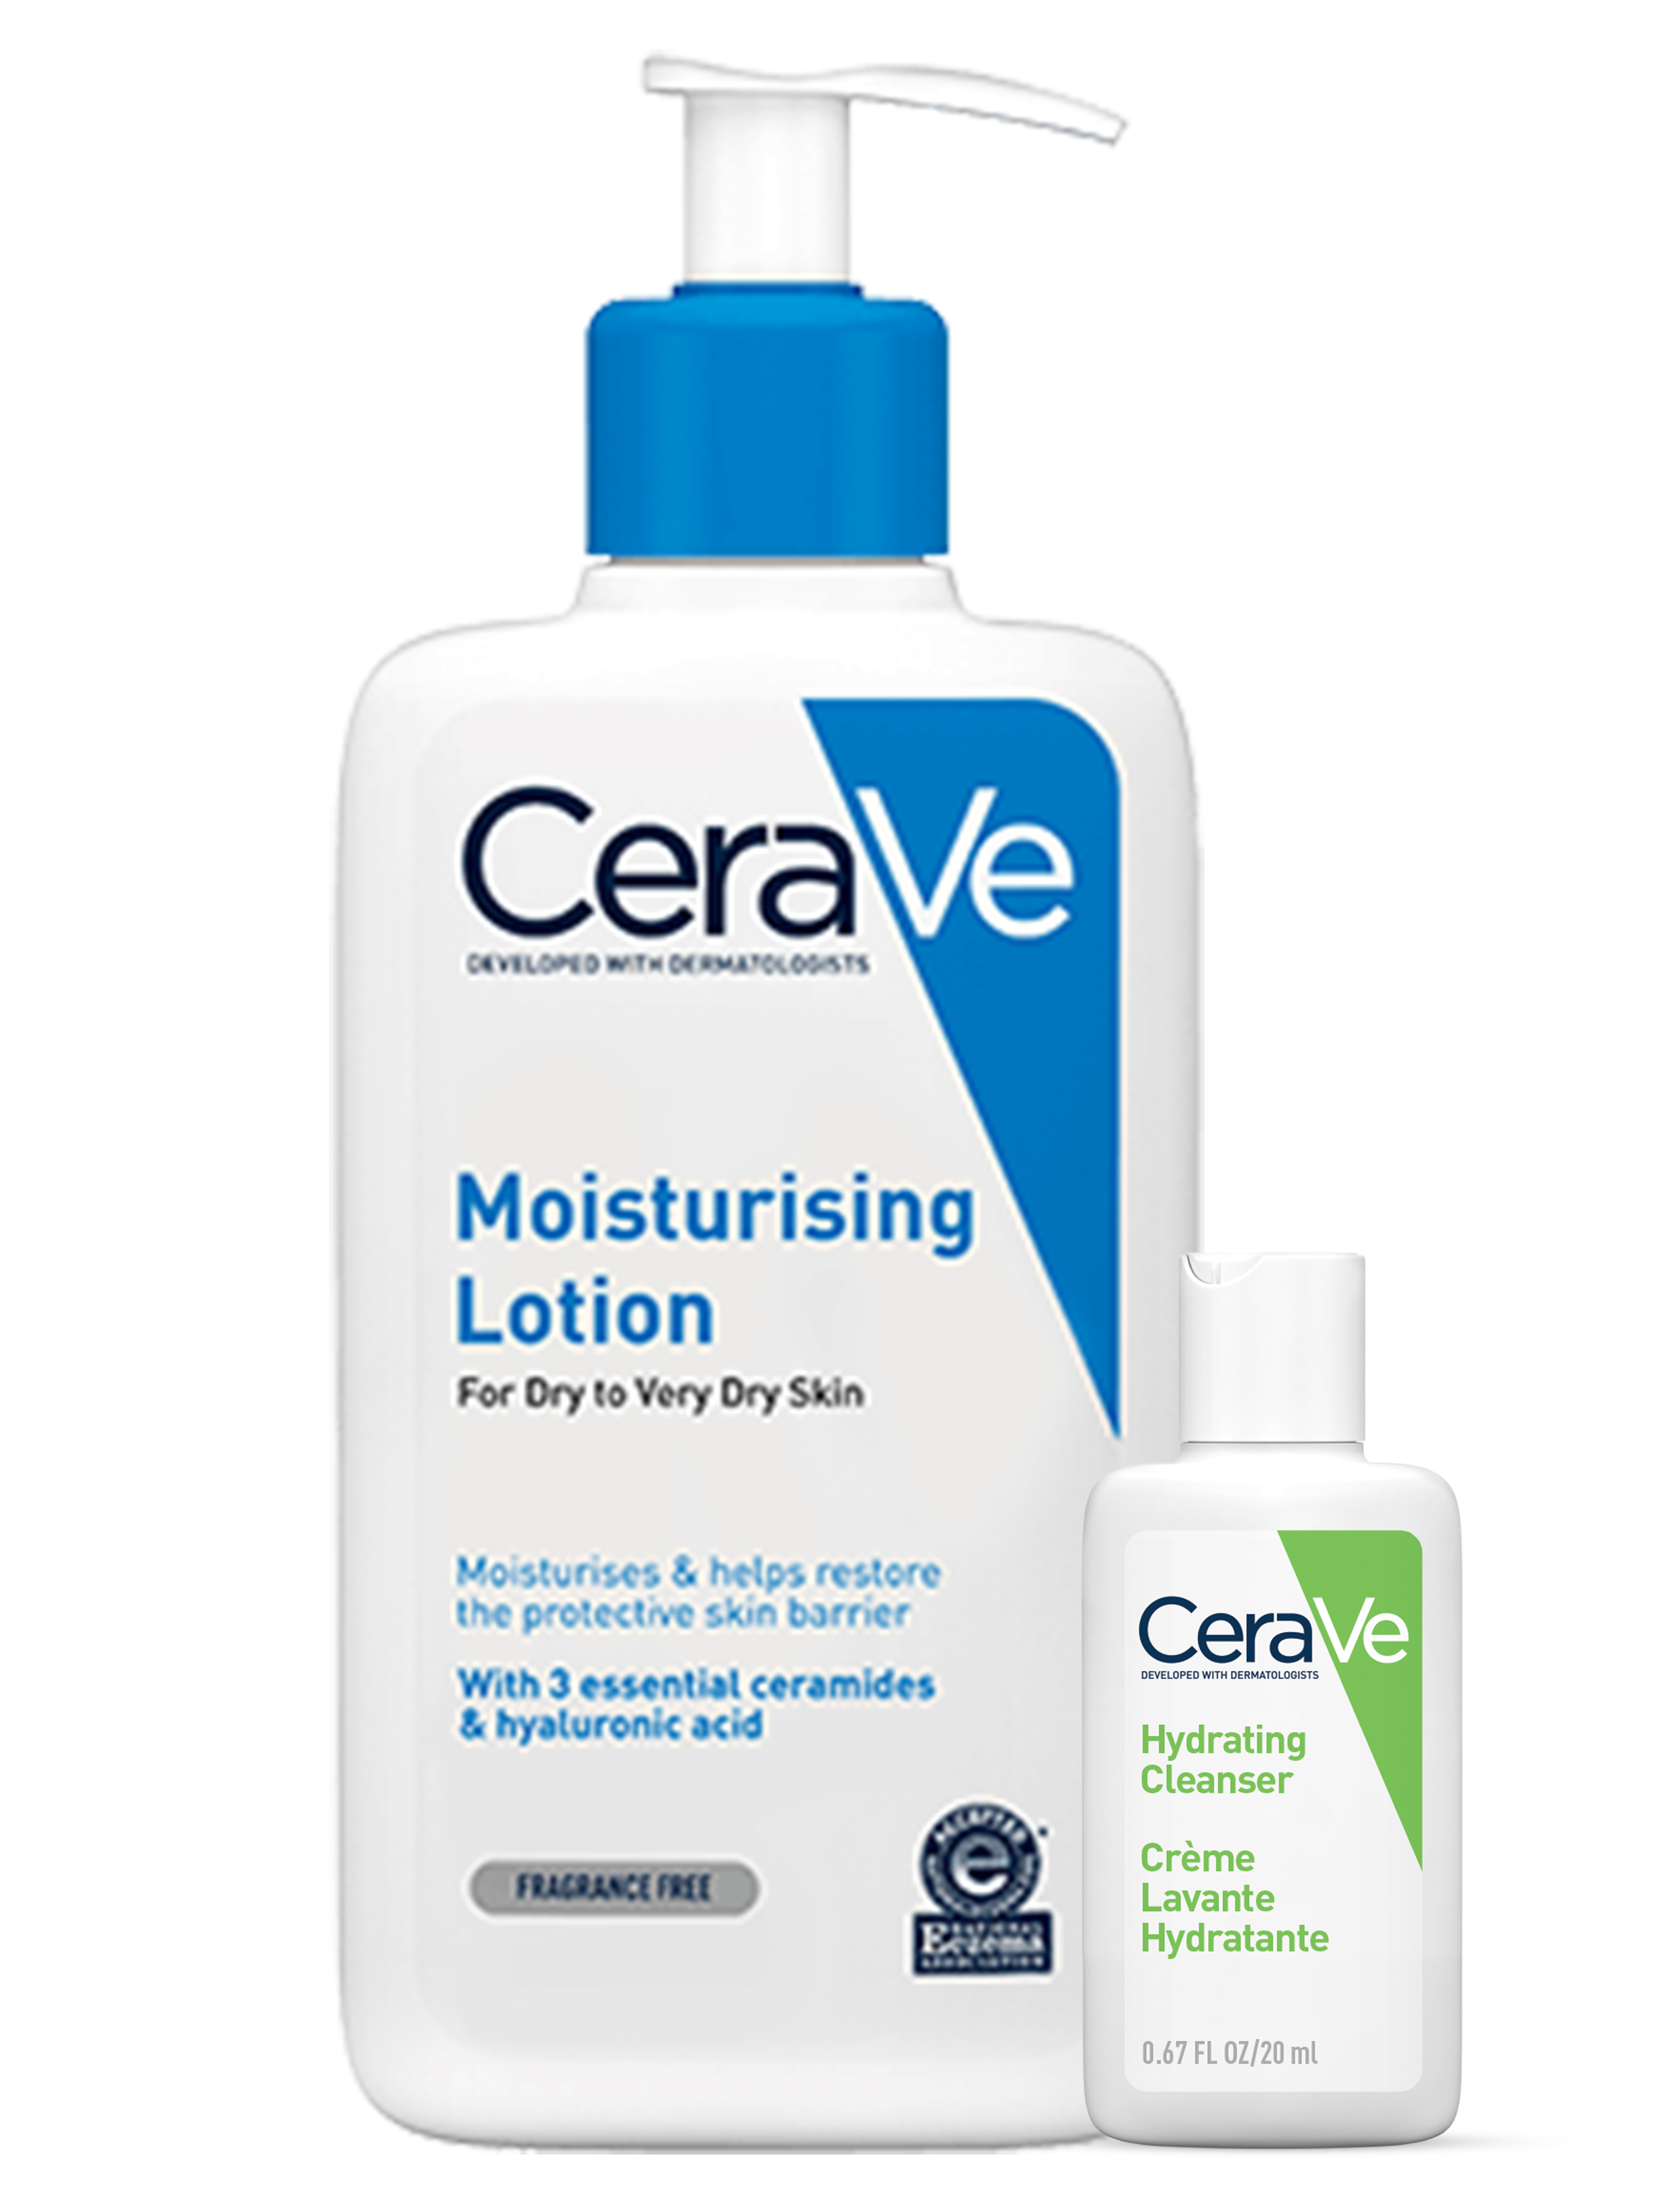 CeraVe Moist Lotion + Hydrating Cleanser, 20 ml